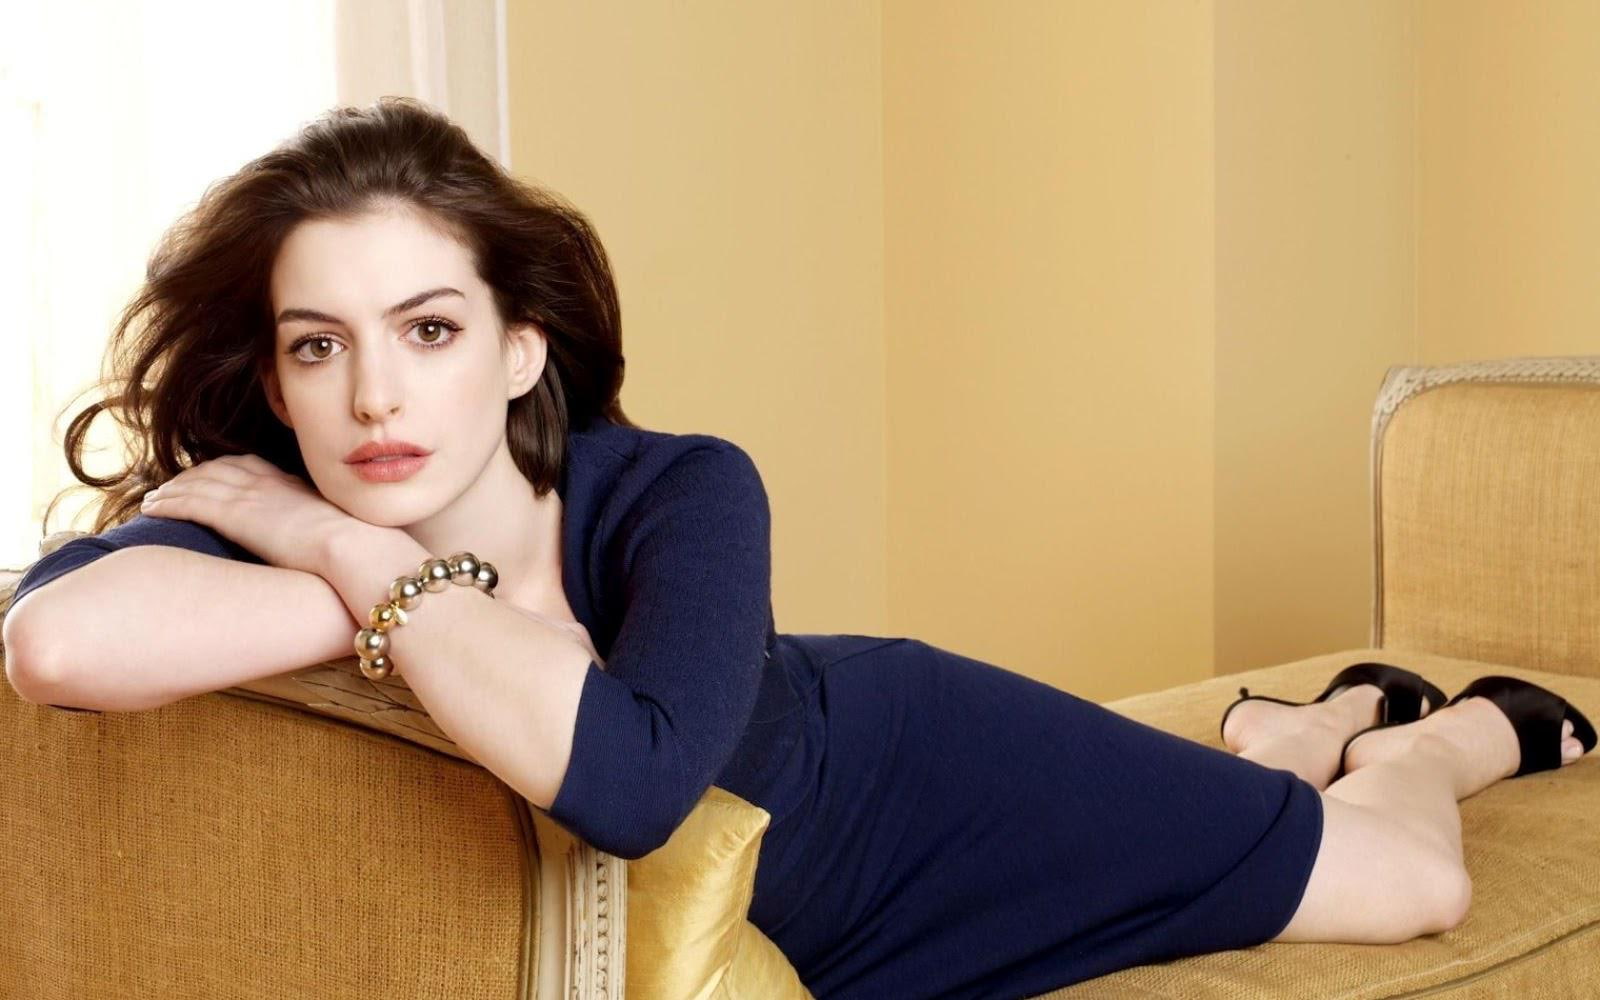 Hollywood Actress Anne Hathaway, anne hathaway photo, celebrity